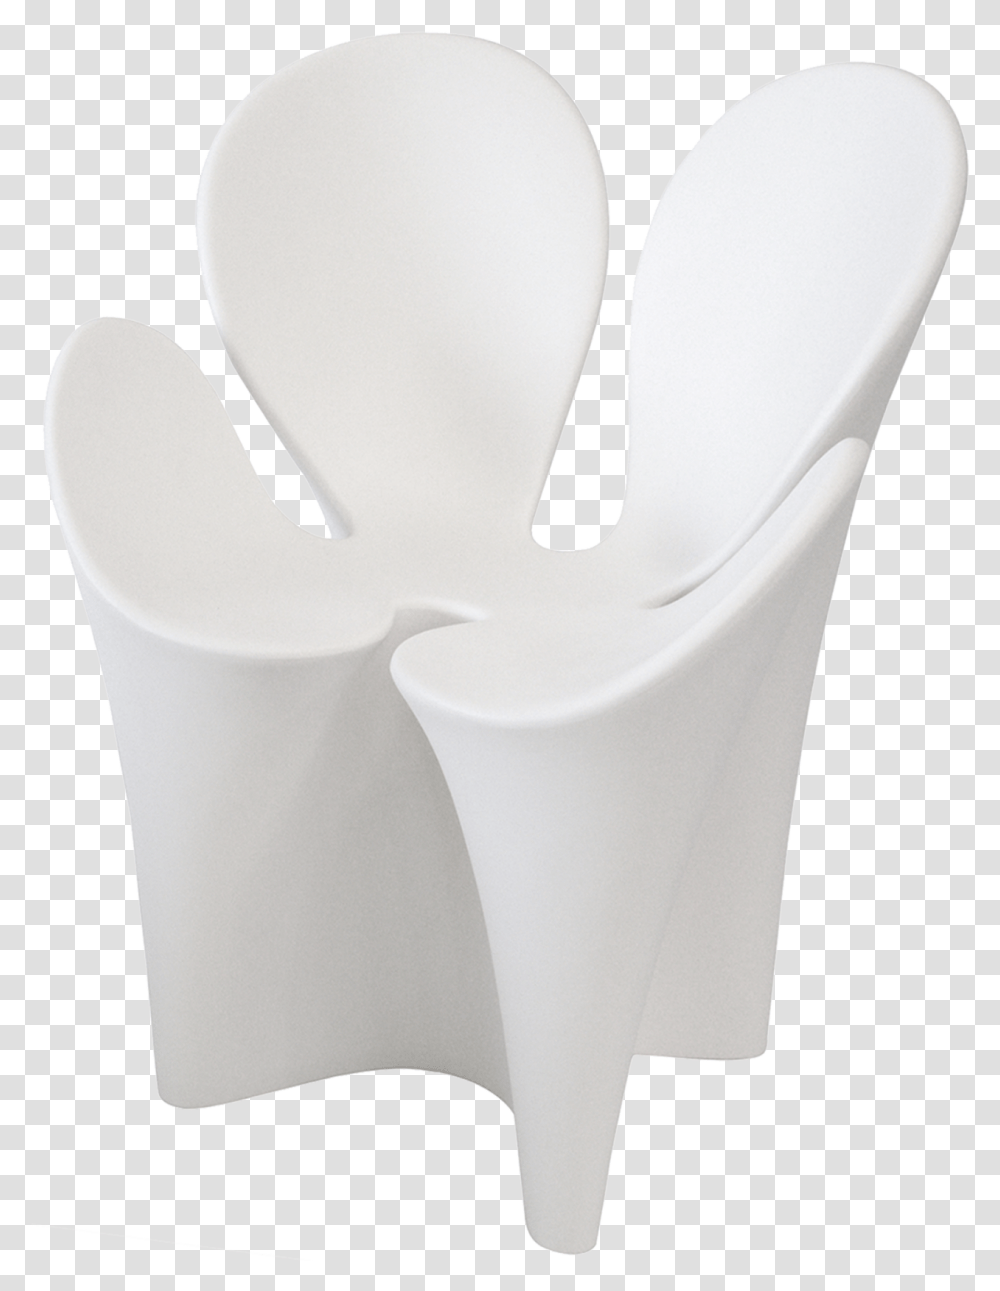 White Clover Chair, Apparel, Glove Transparent Png